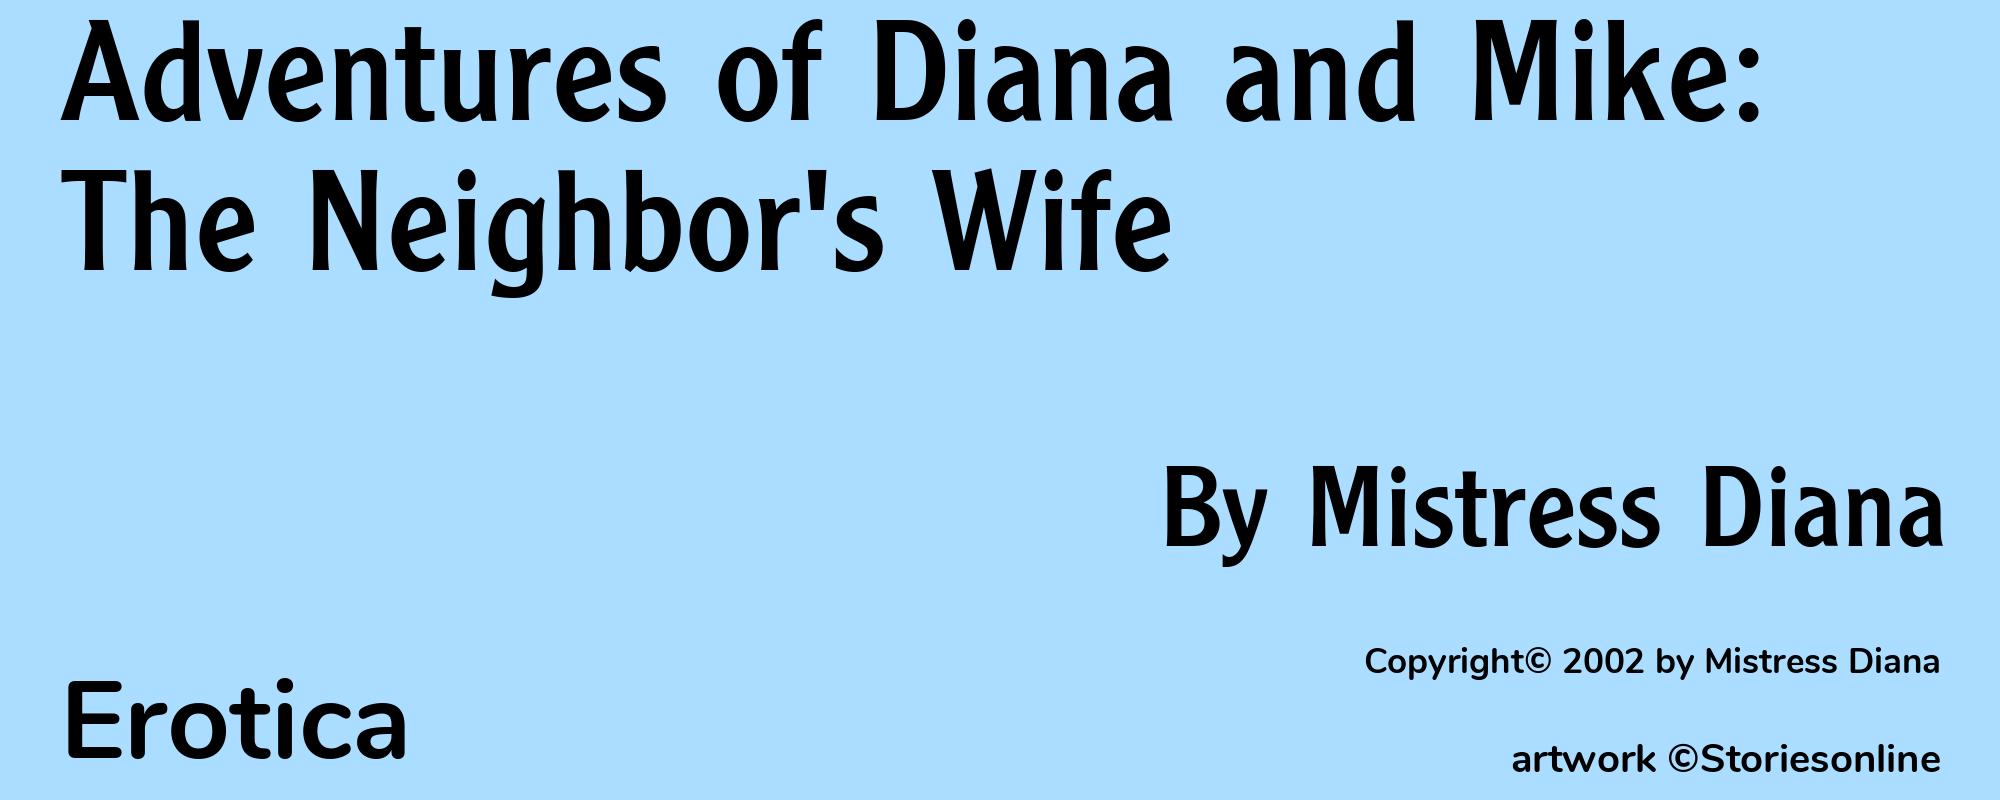 Adventures of Diana and Mike: The Neighbor's Wife - Cover